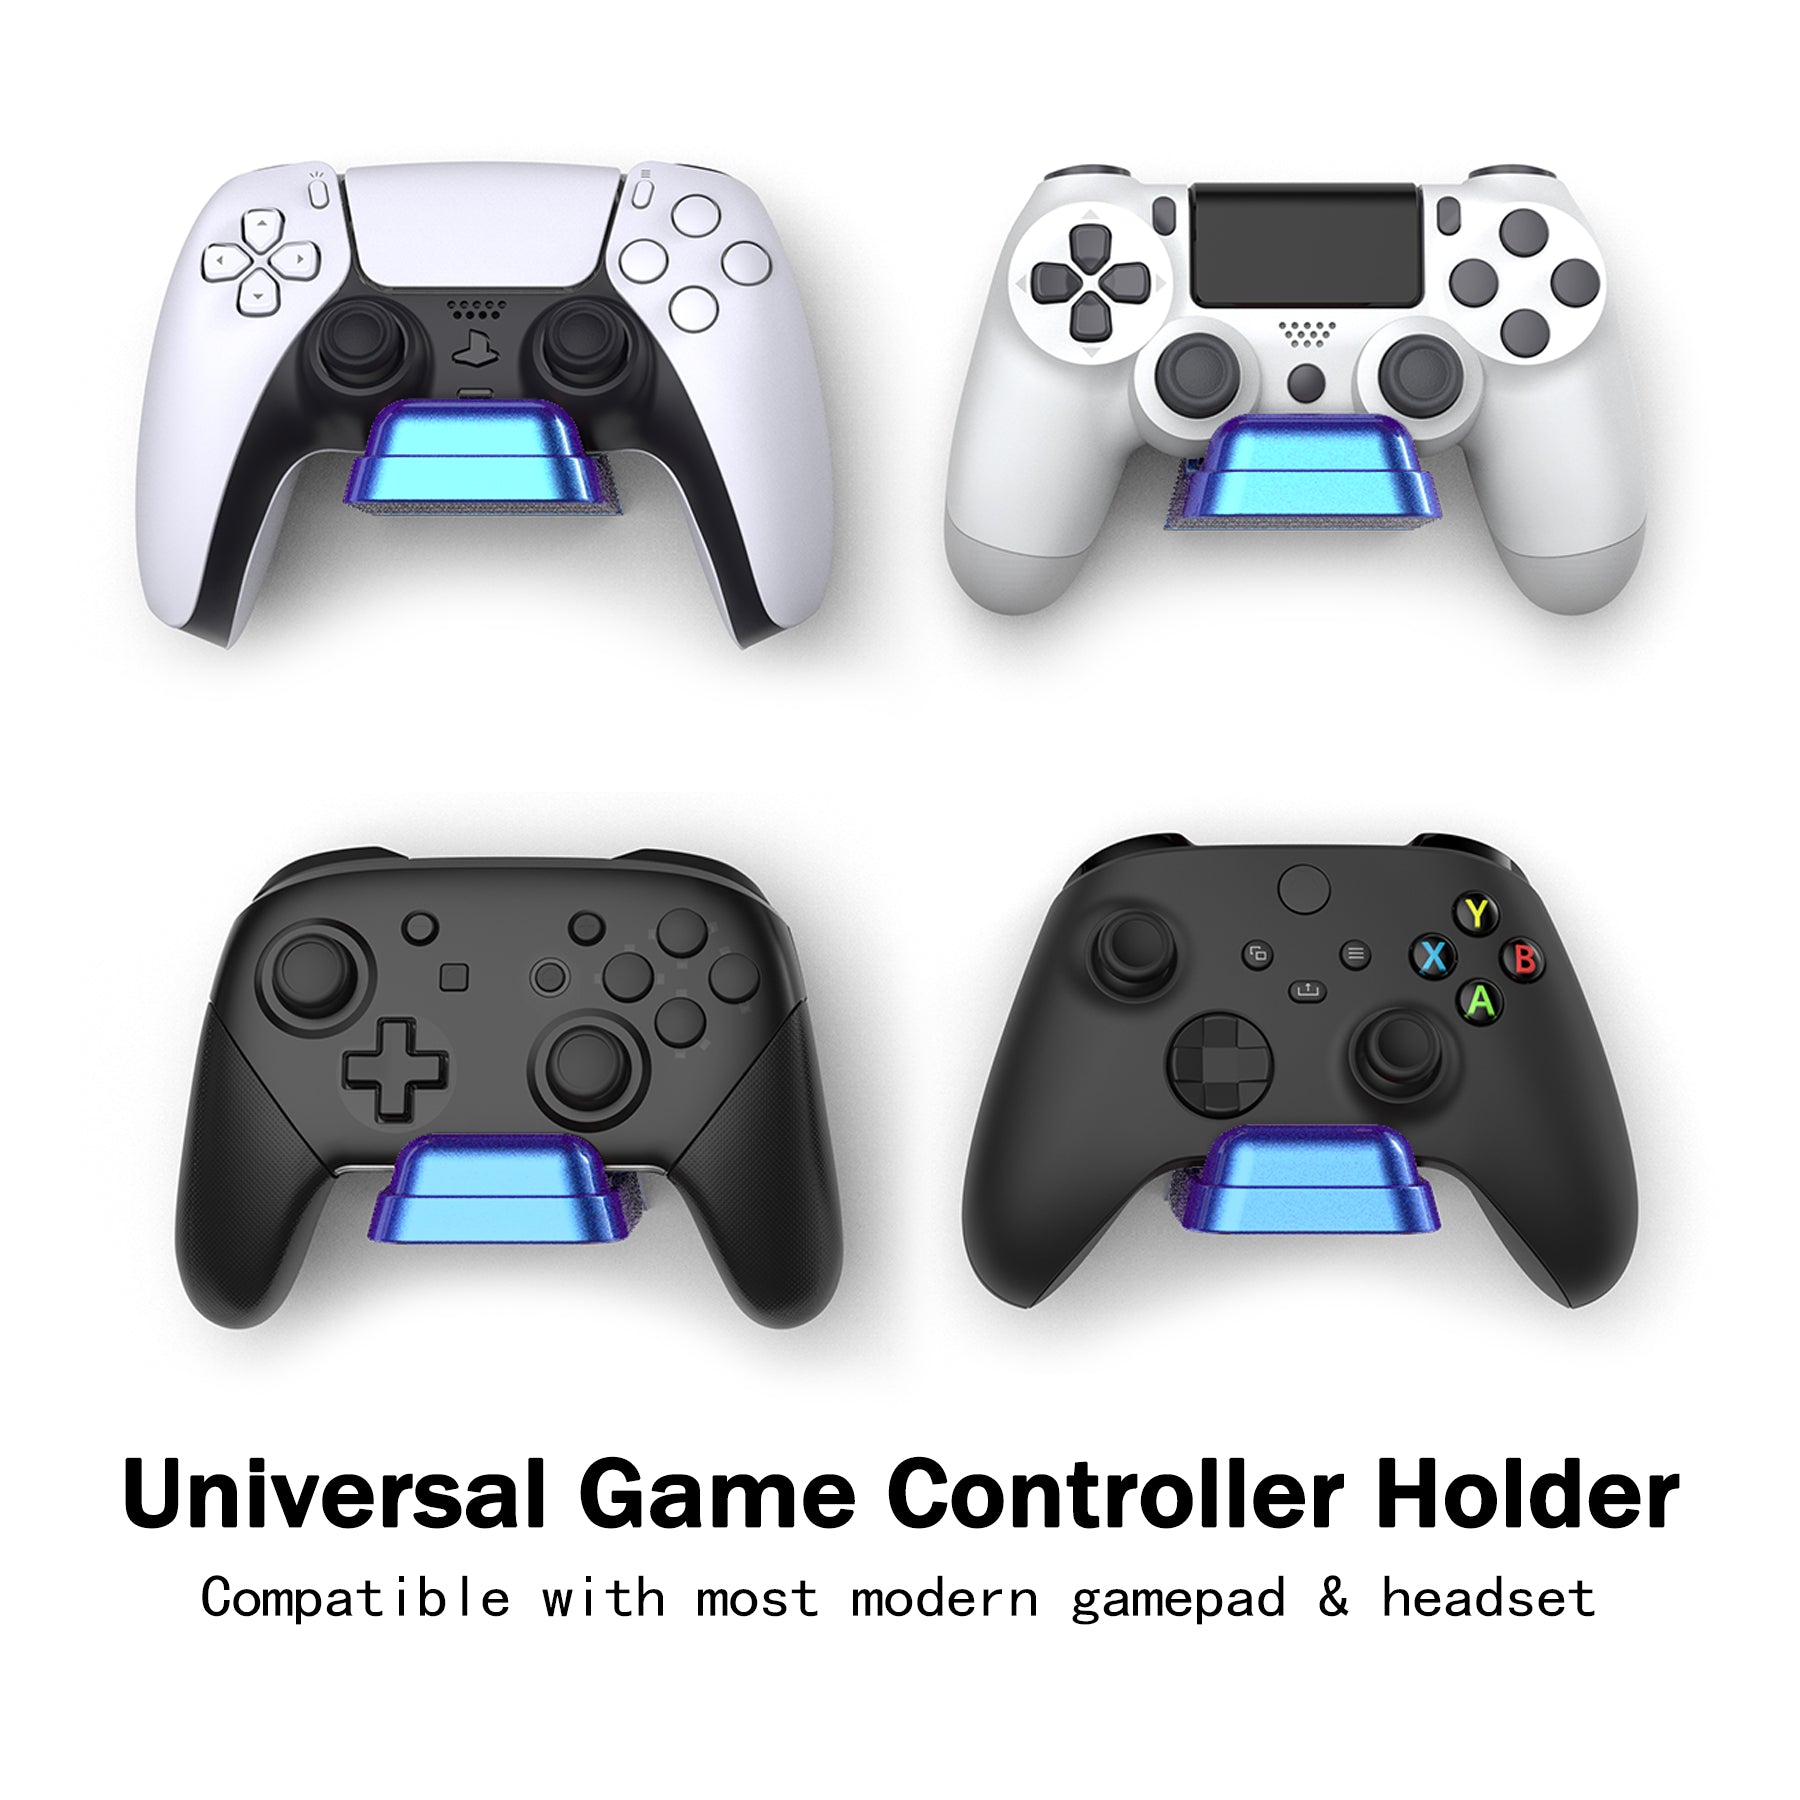 PlayVital 2 Pack Universal Game Controller Wall Mount for ps5 & Headset, Wall Stand for Xbox Series Controller, Wall Holder for Switch Pro Controller, Dedicated Console Hanger Mode for ps5 - Chameleon Purple Blue - PFPJ095 playvital